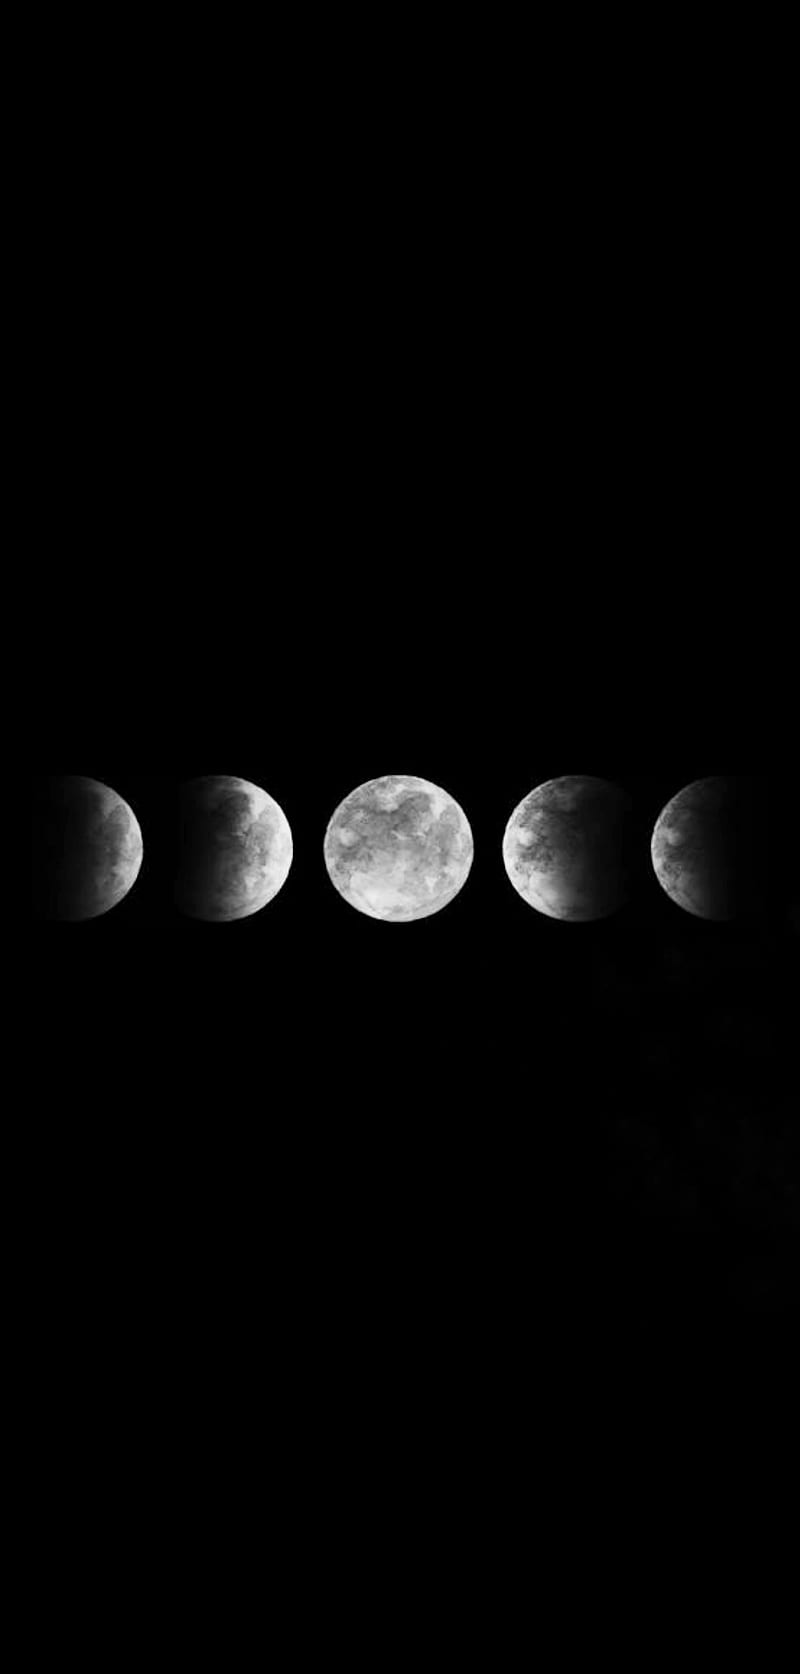 Moon Phases Photos Download The BEST Free Moon Phases Stock Photos  HD  Images